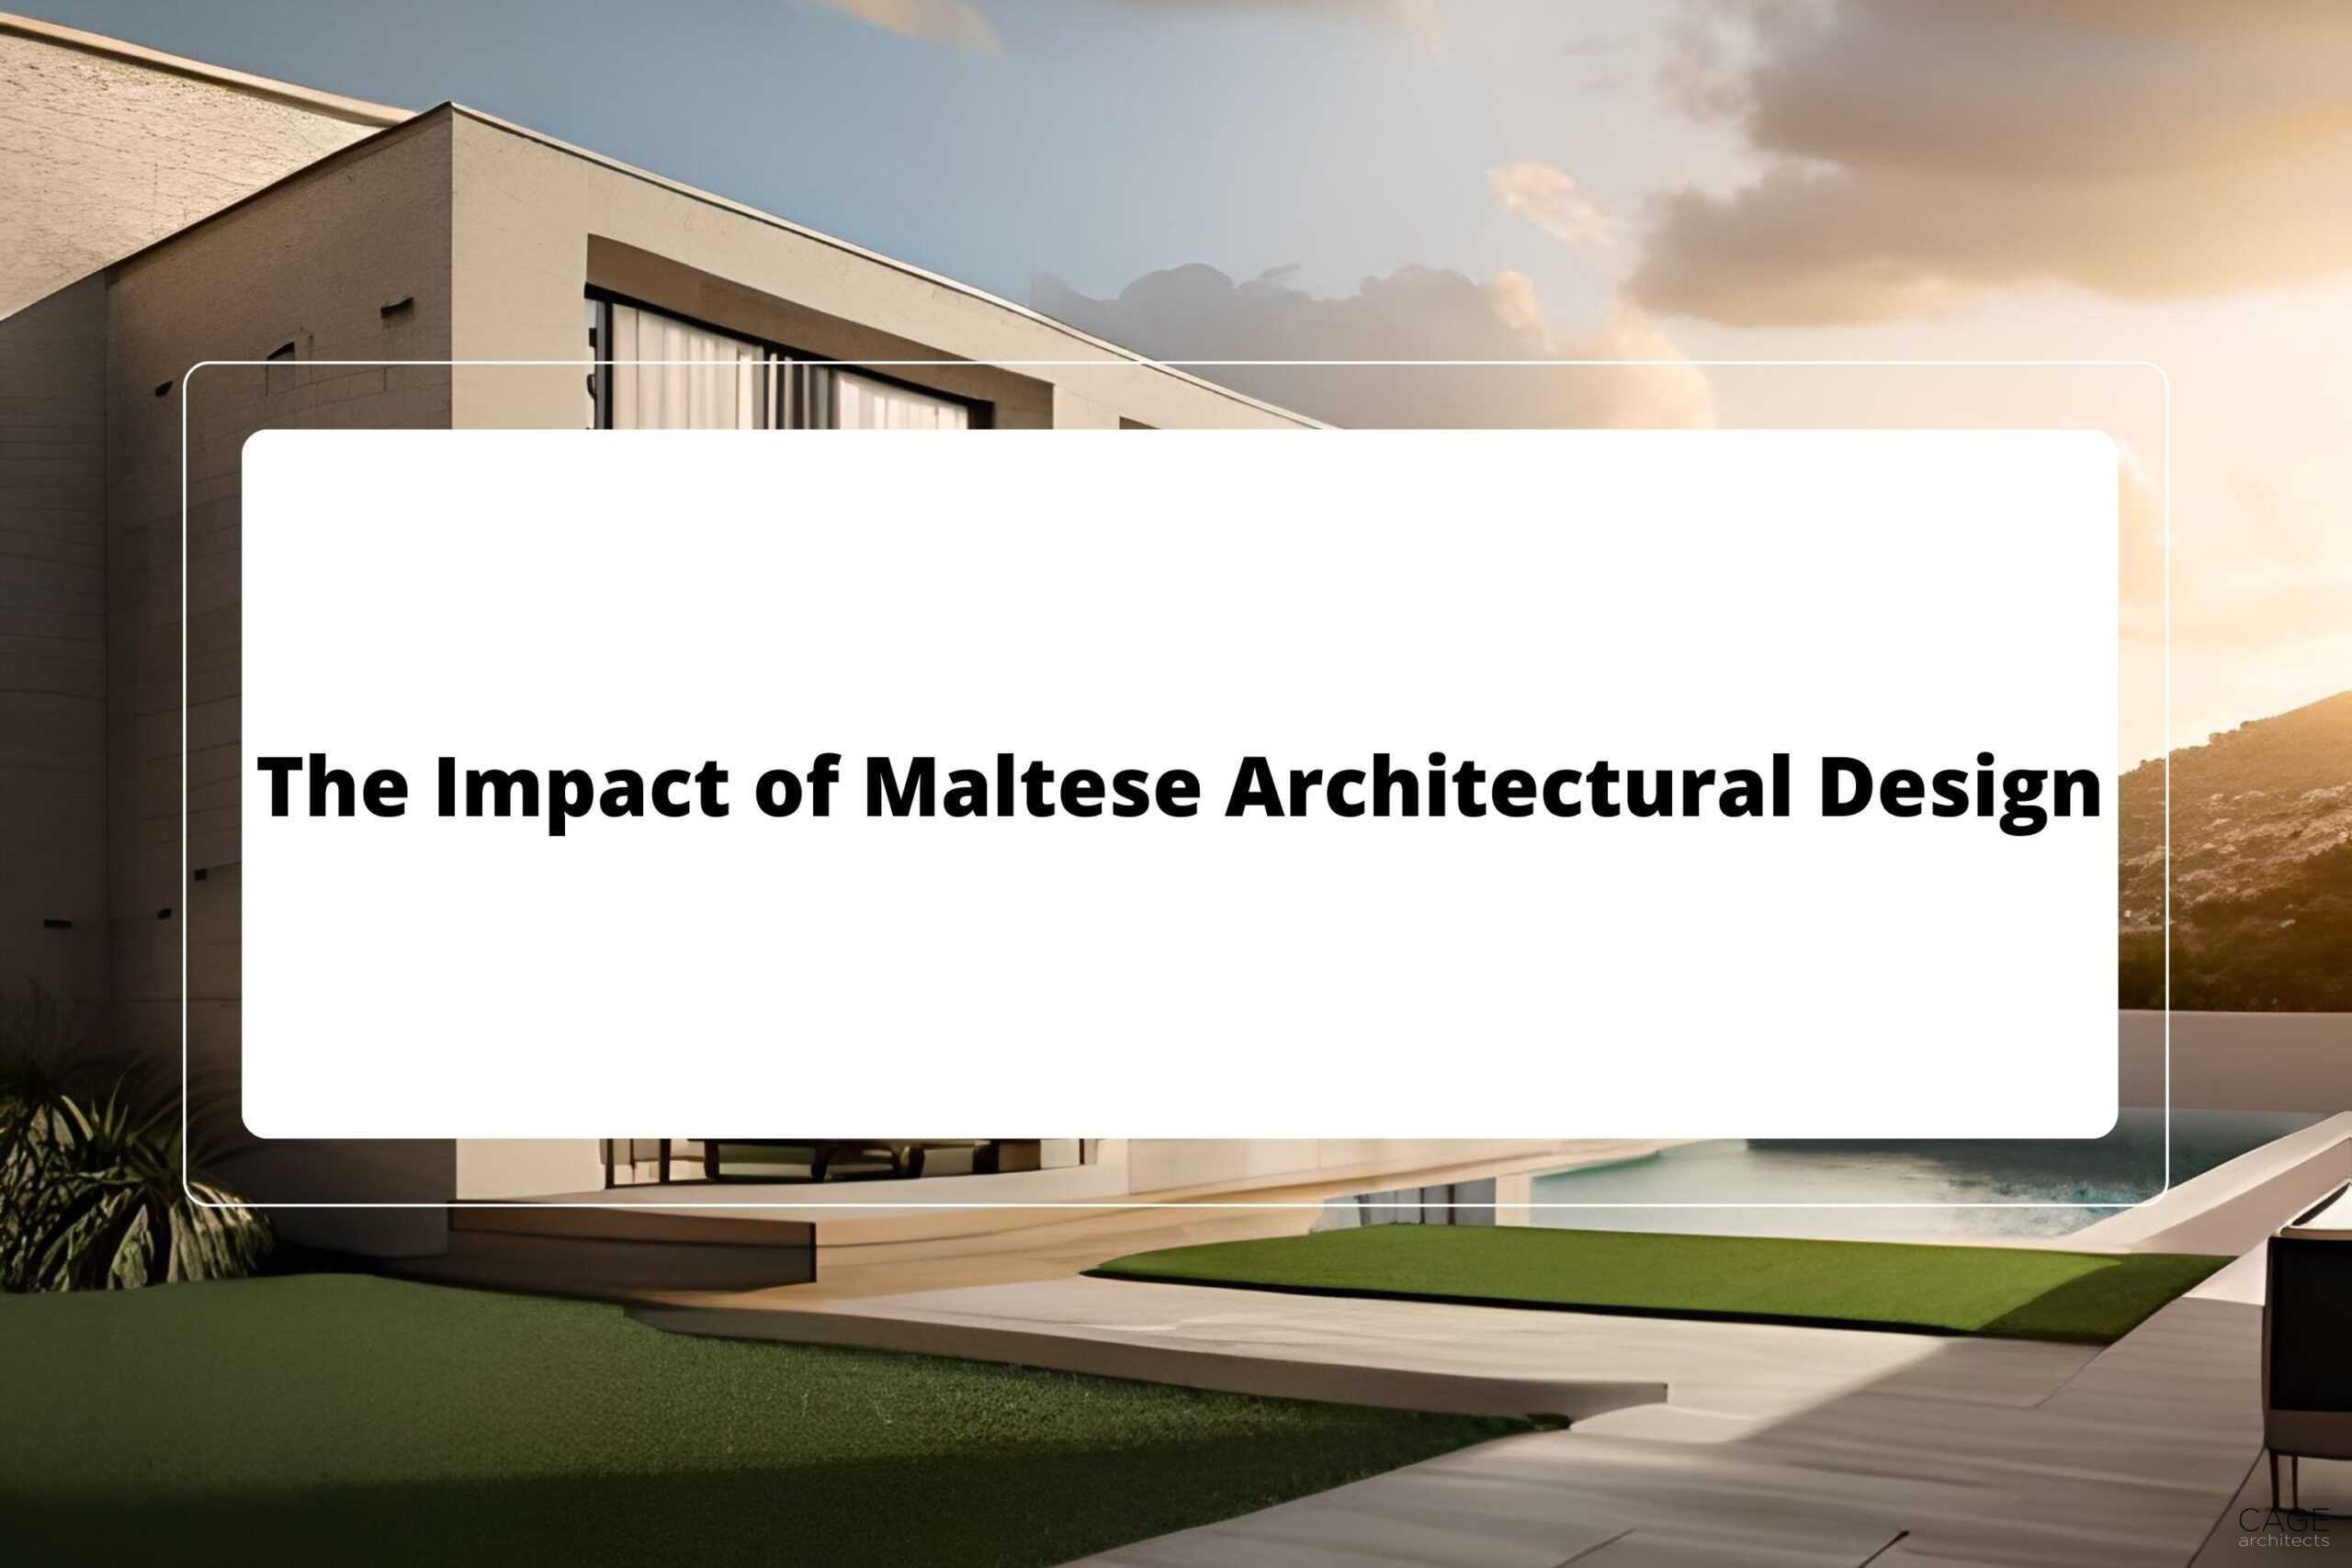 The Impact of Maltese Architectural Design on the Urban Landscape